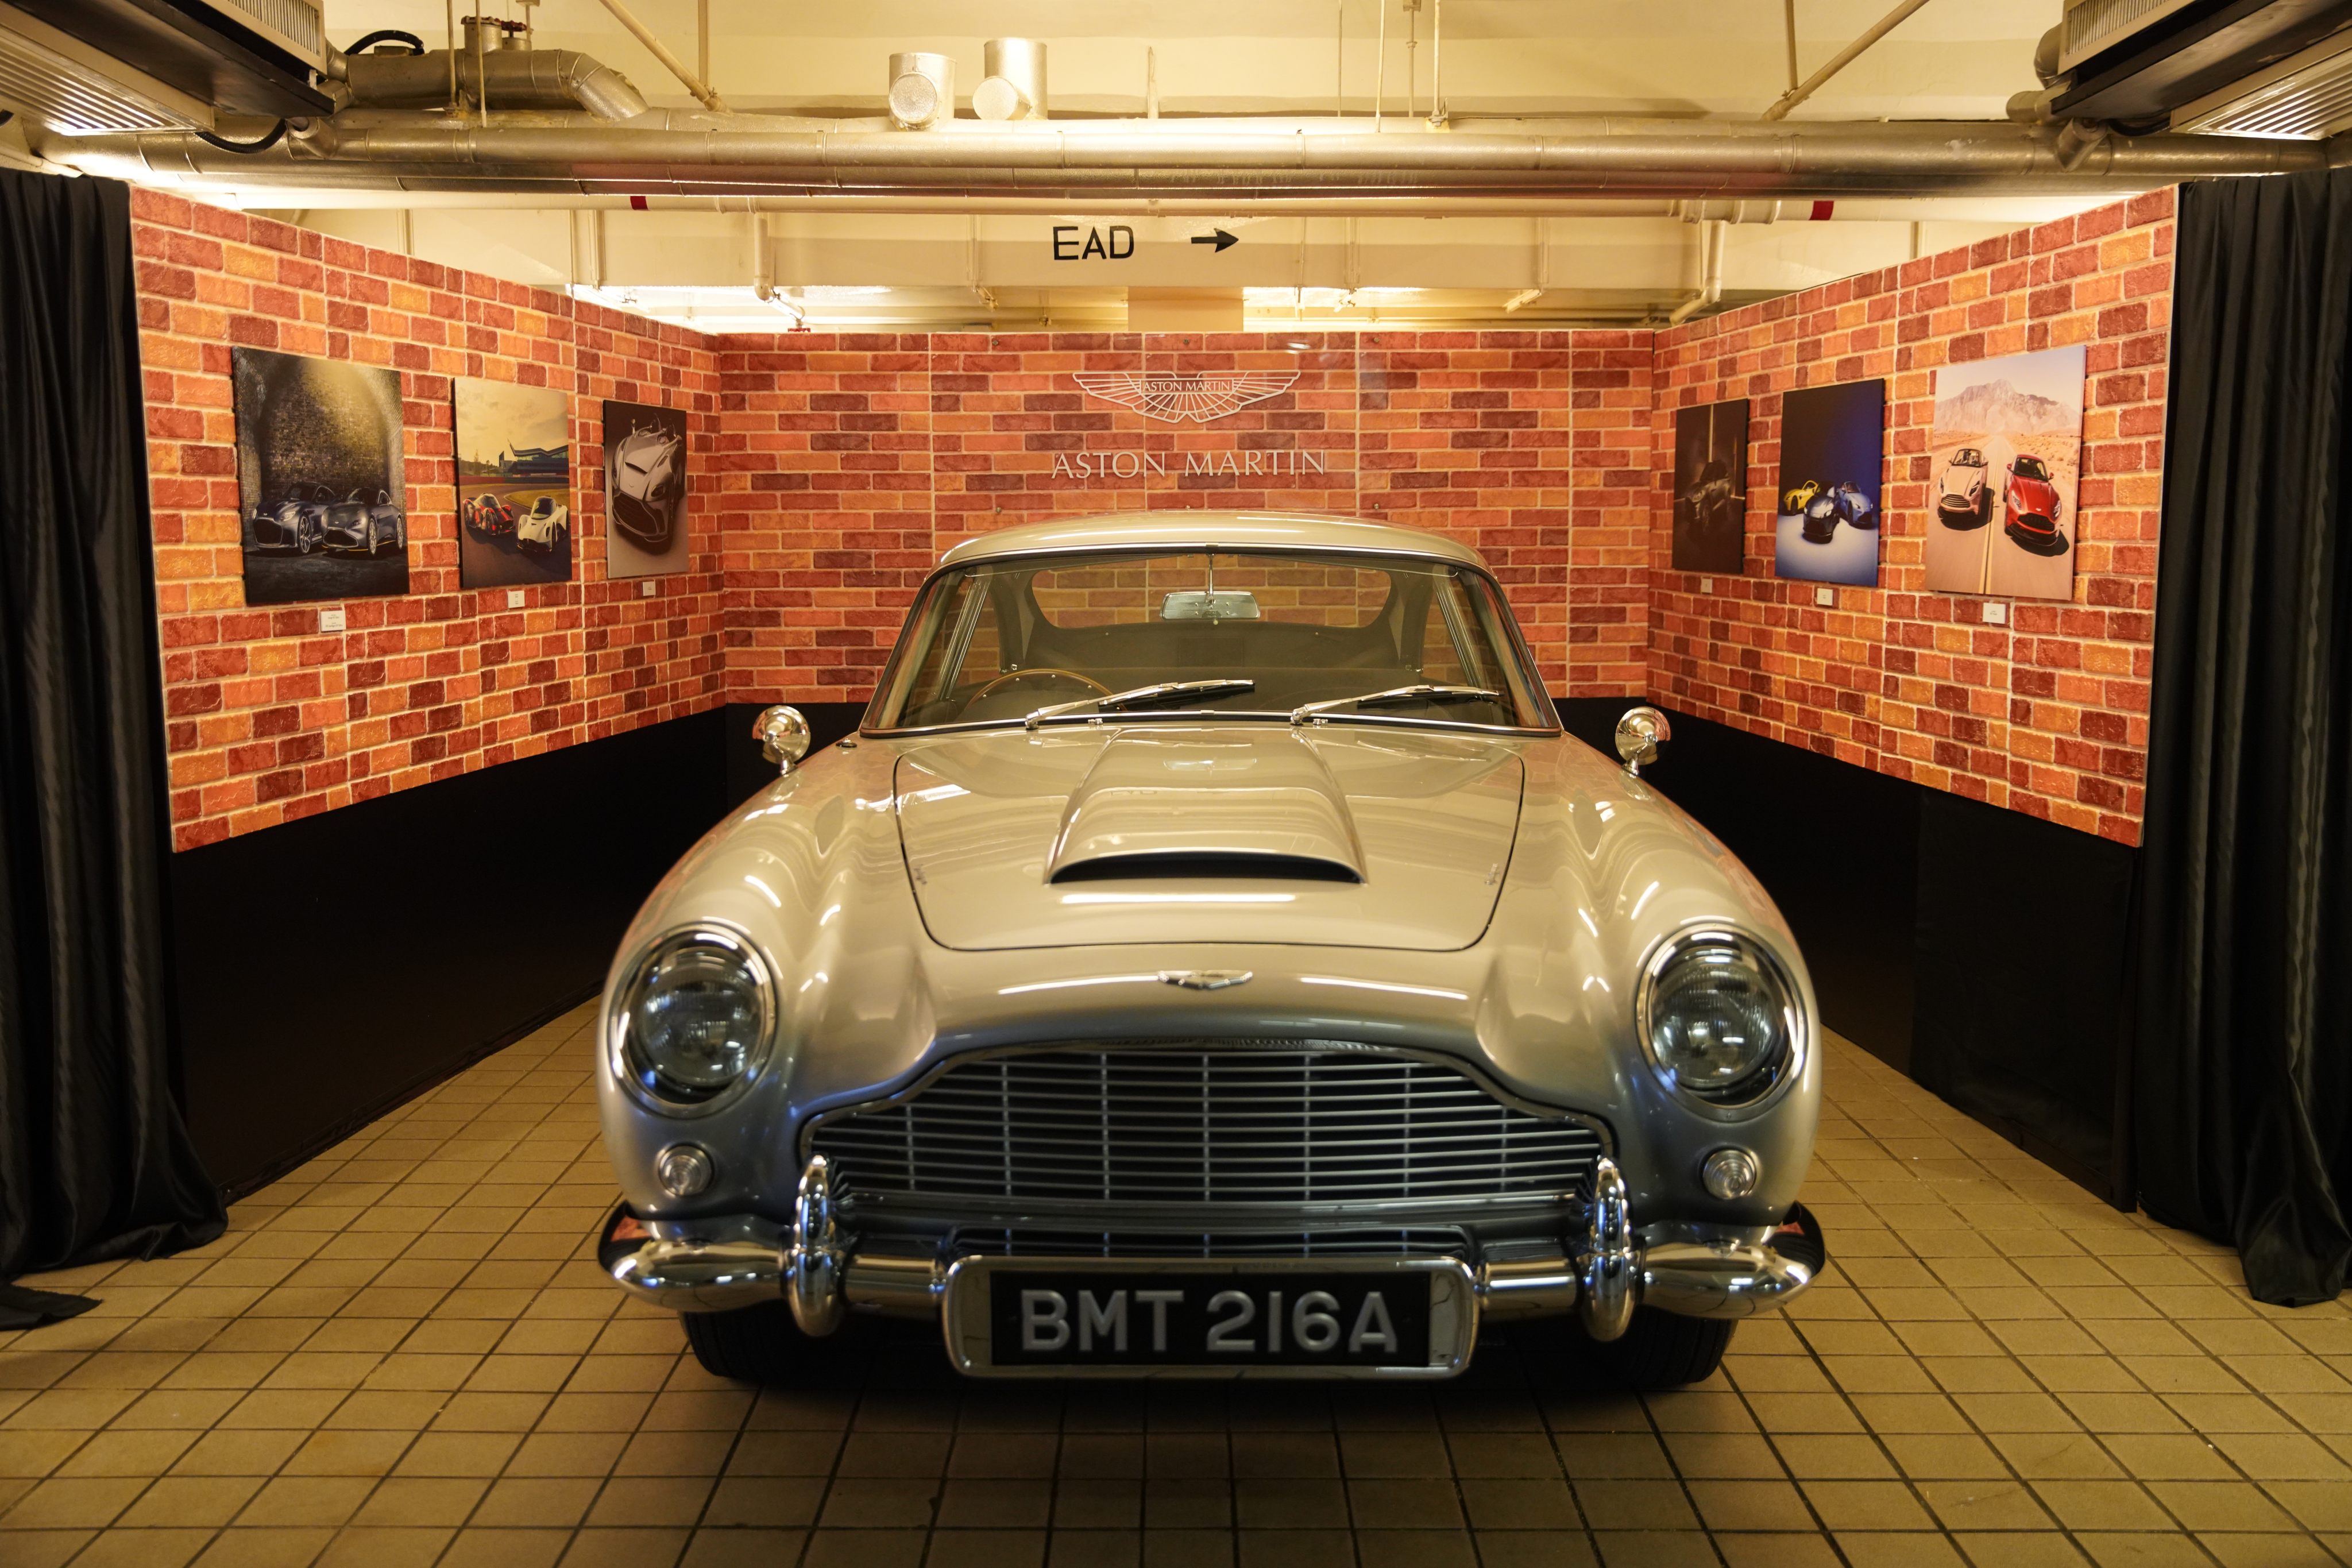 An Aston Martin DB5 Goldfinger Continuation, a limited edition recreation of James Bond’s DB5 in the 1964 film Goldfinger, on display at The Peninsula Hotel in May 2021. Photo: Winson Wong